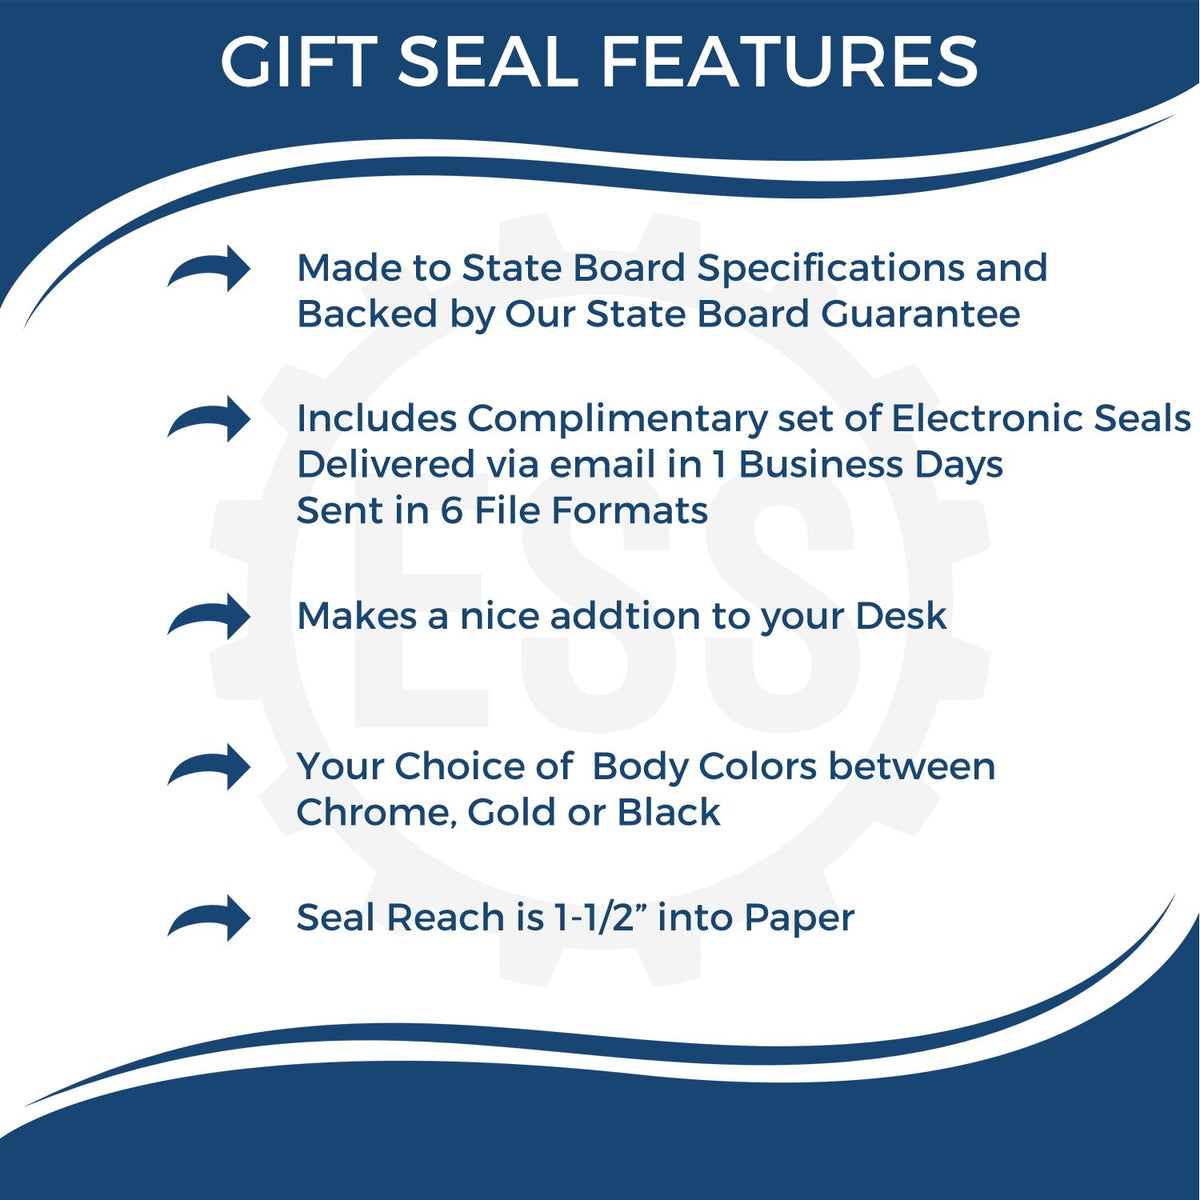 A picture of an infographic highlighting the selling points for the Gift Georgia Engineer Seal